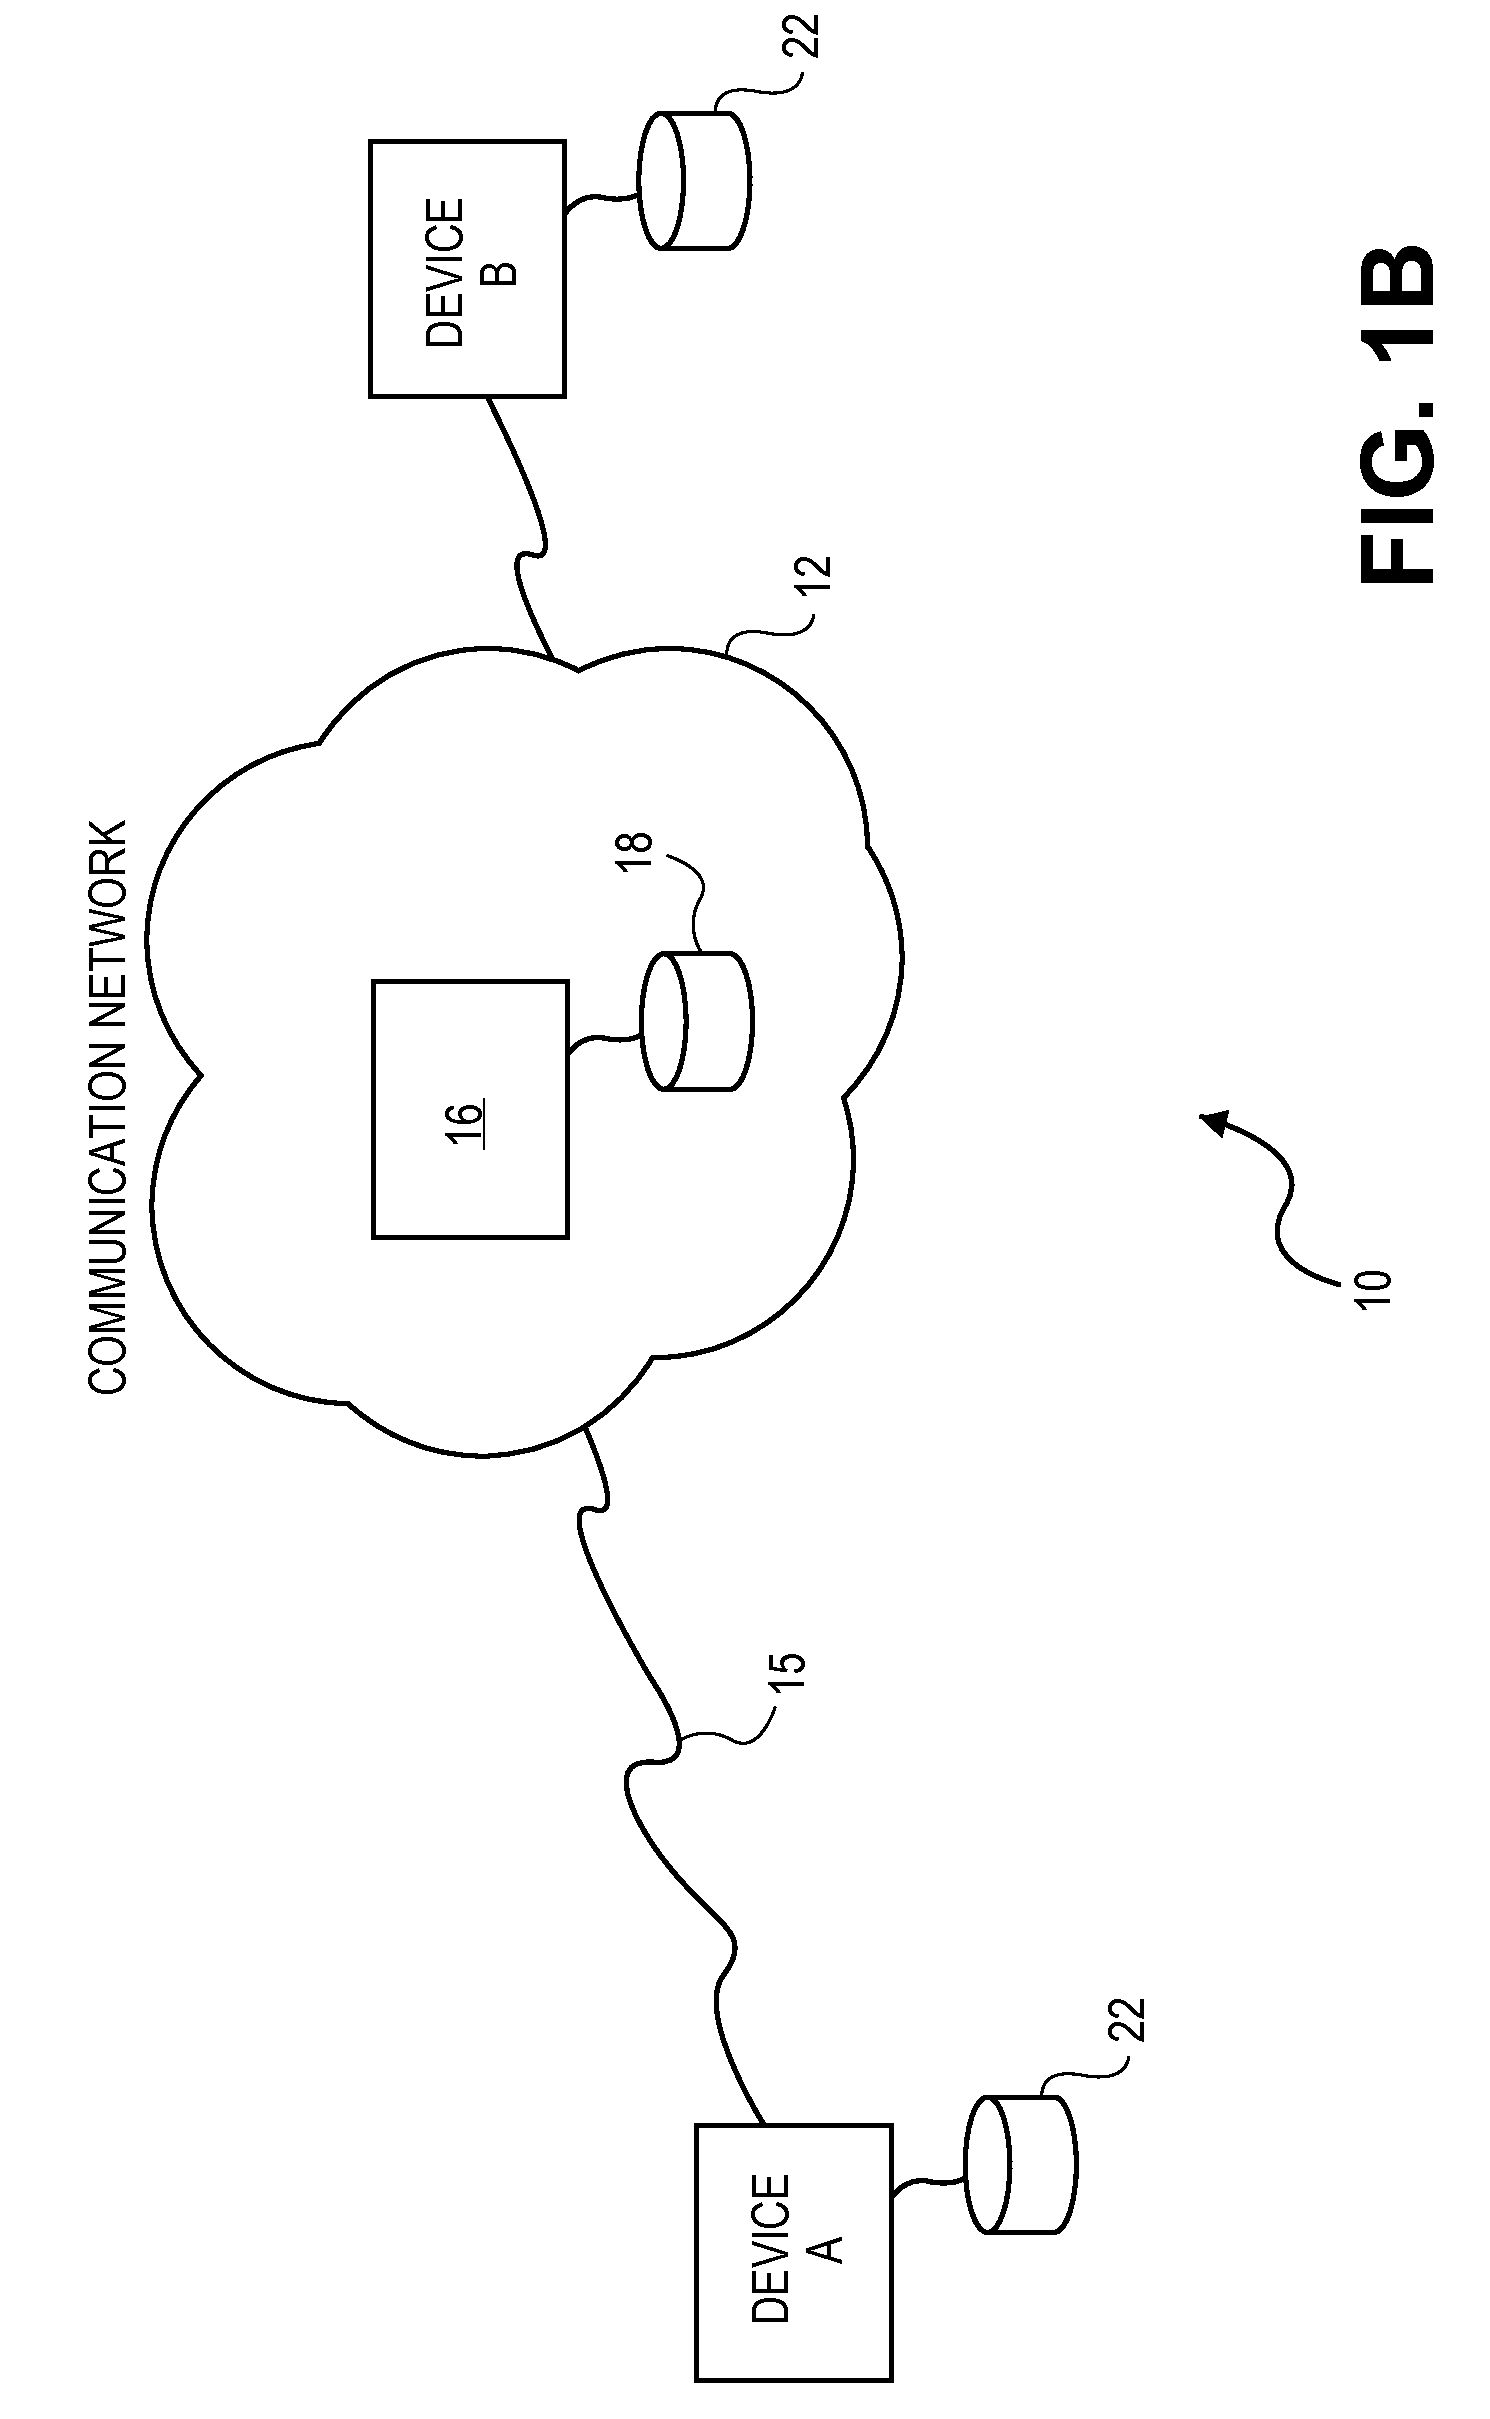 Apparatus and method for enabling communication when network connectivity is reduced or lost during a conversation and for resuming the conversation when connectivity improves